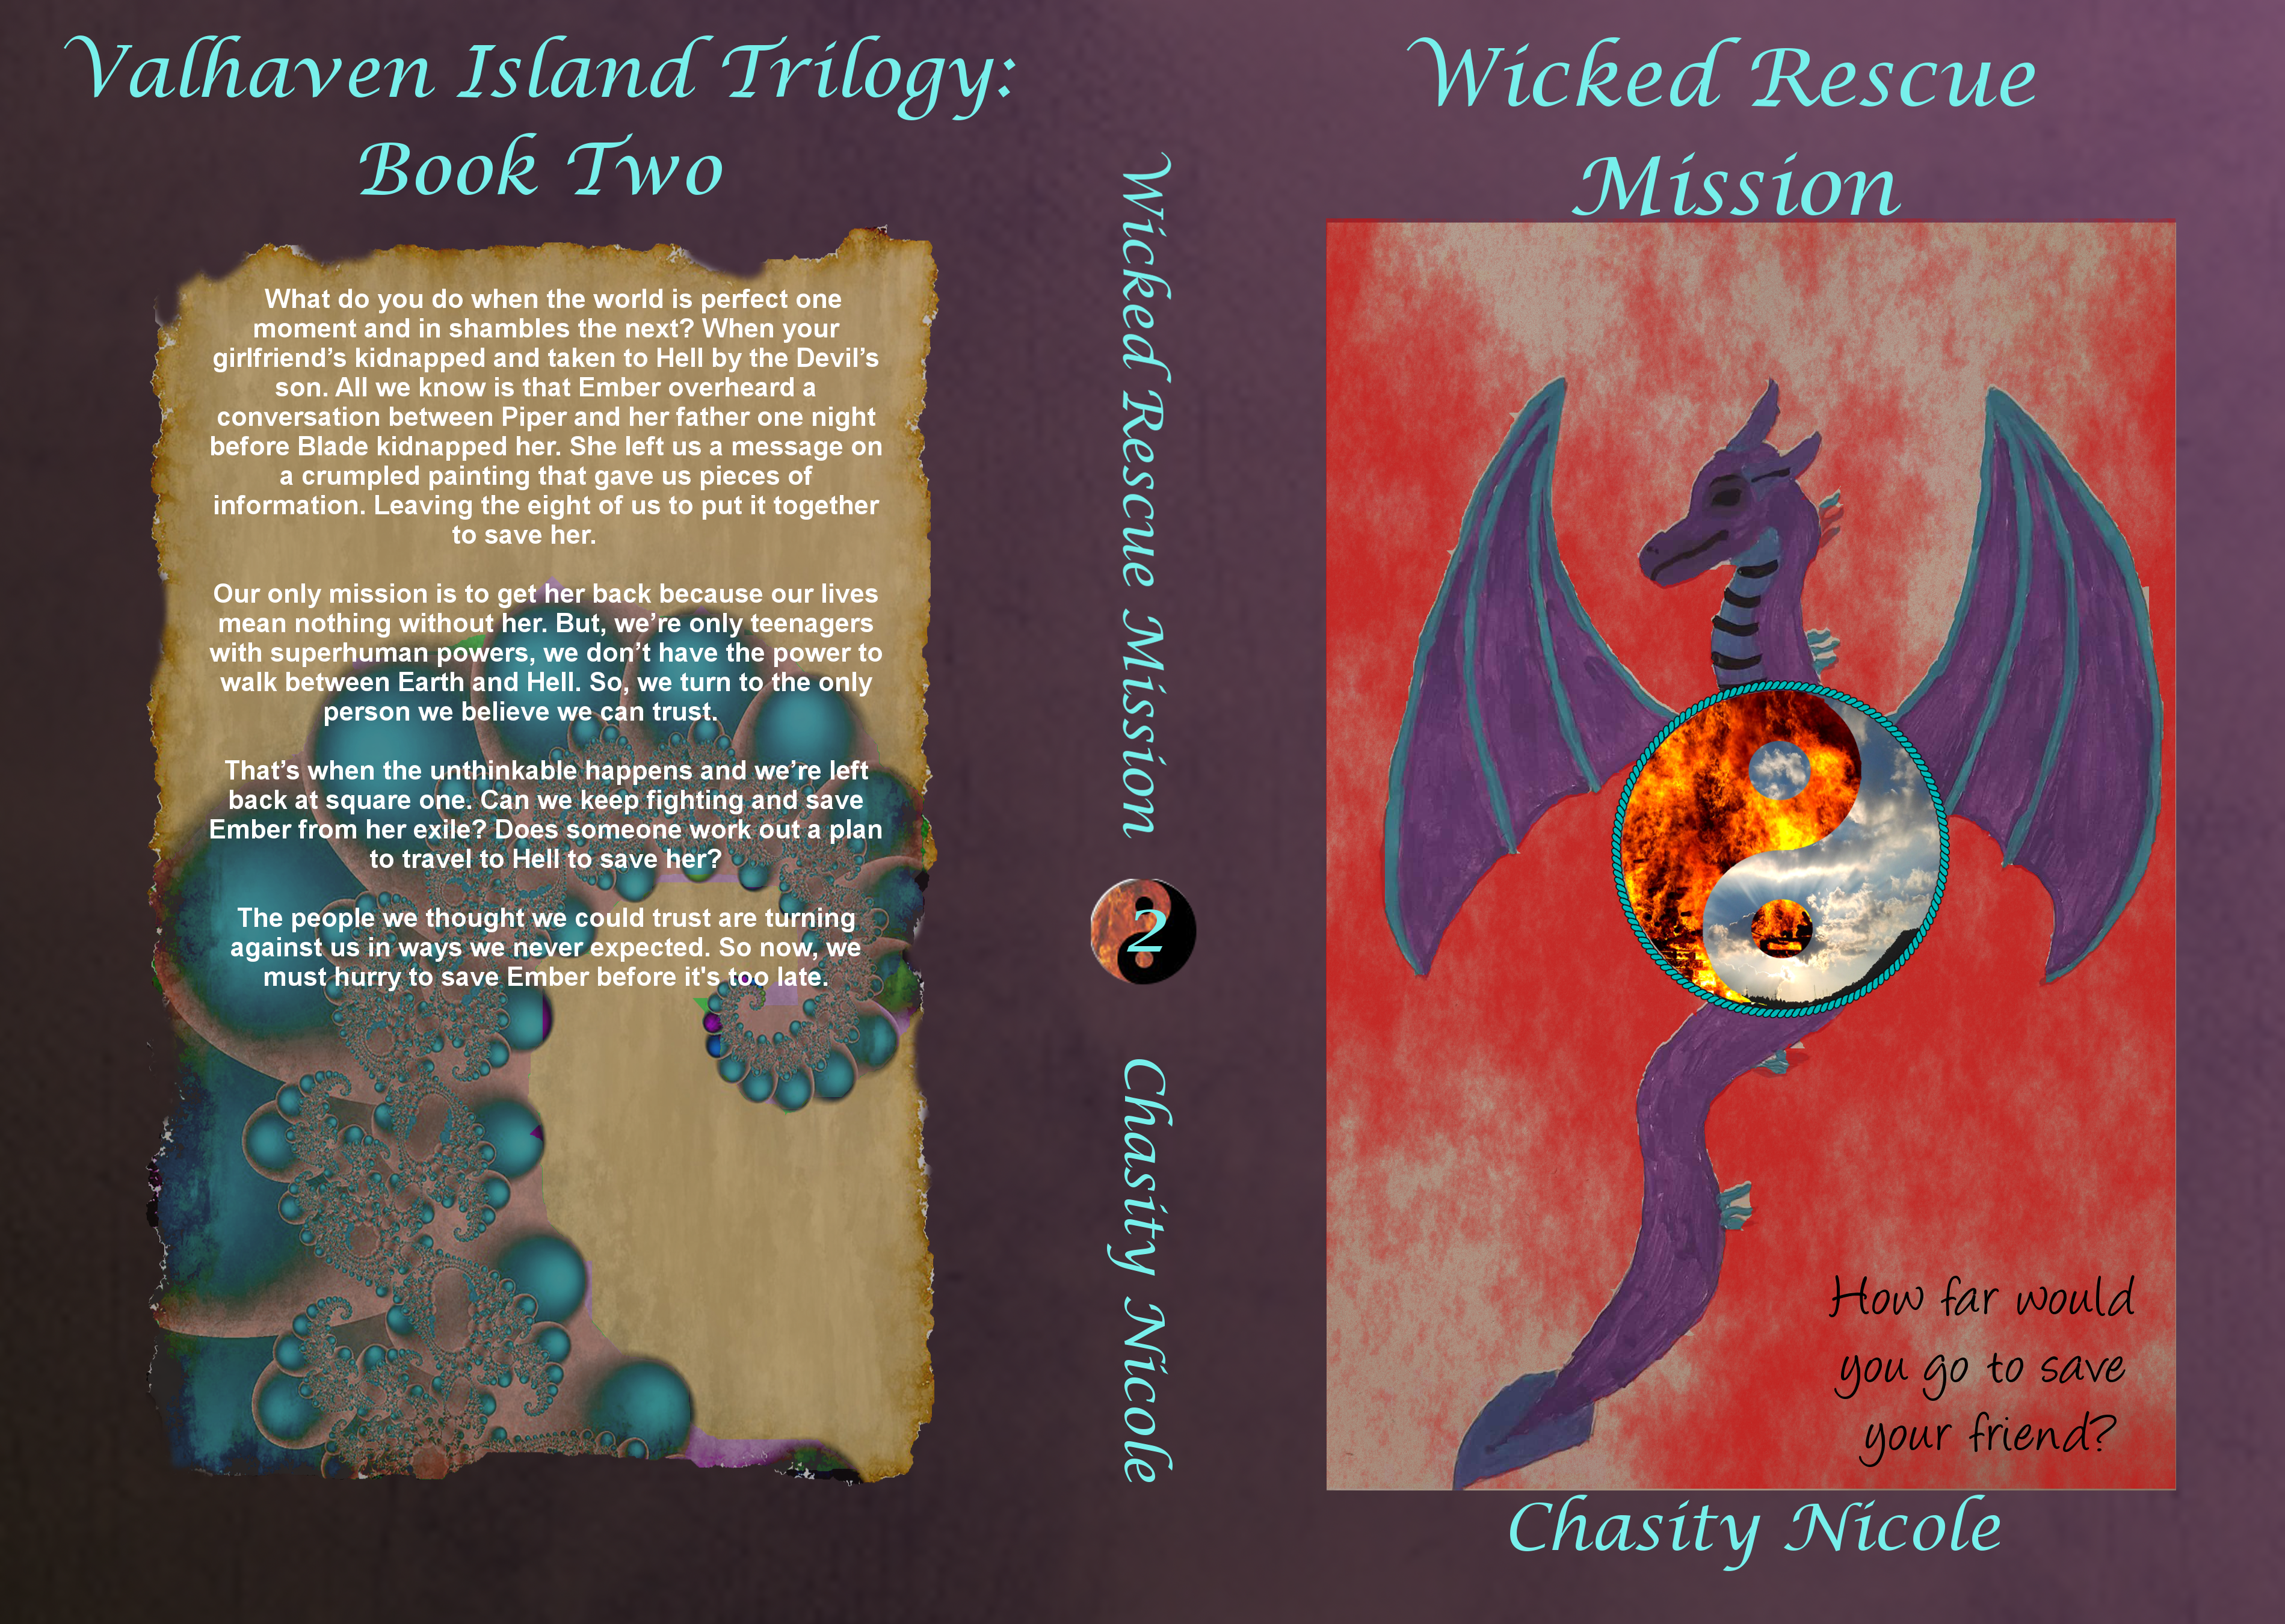 Wicked Rescue Mission Book Launch